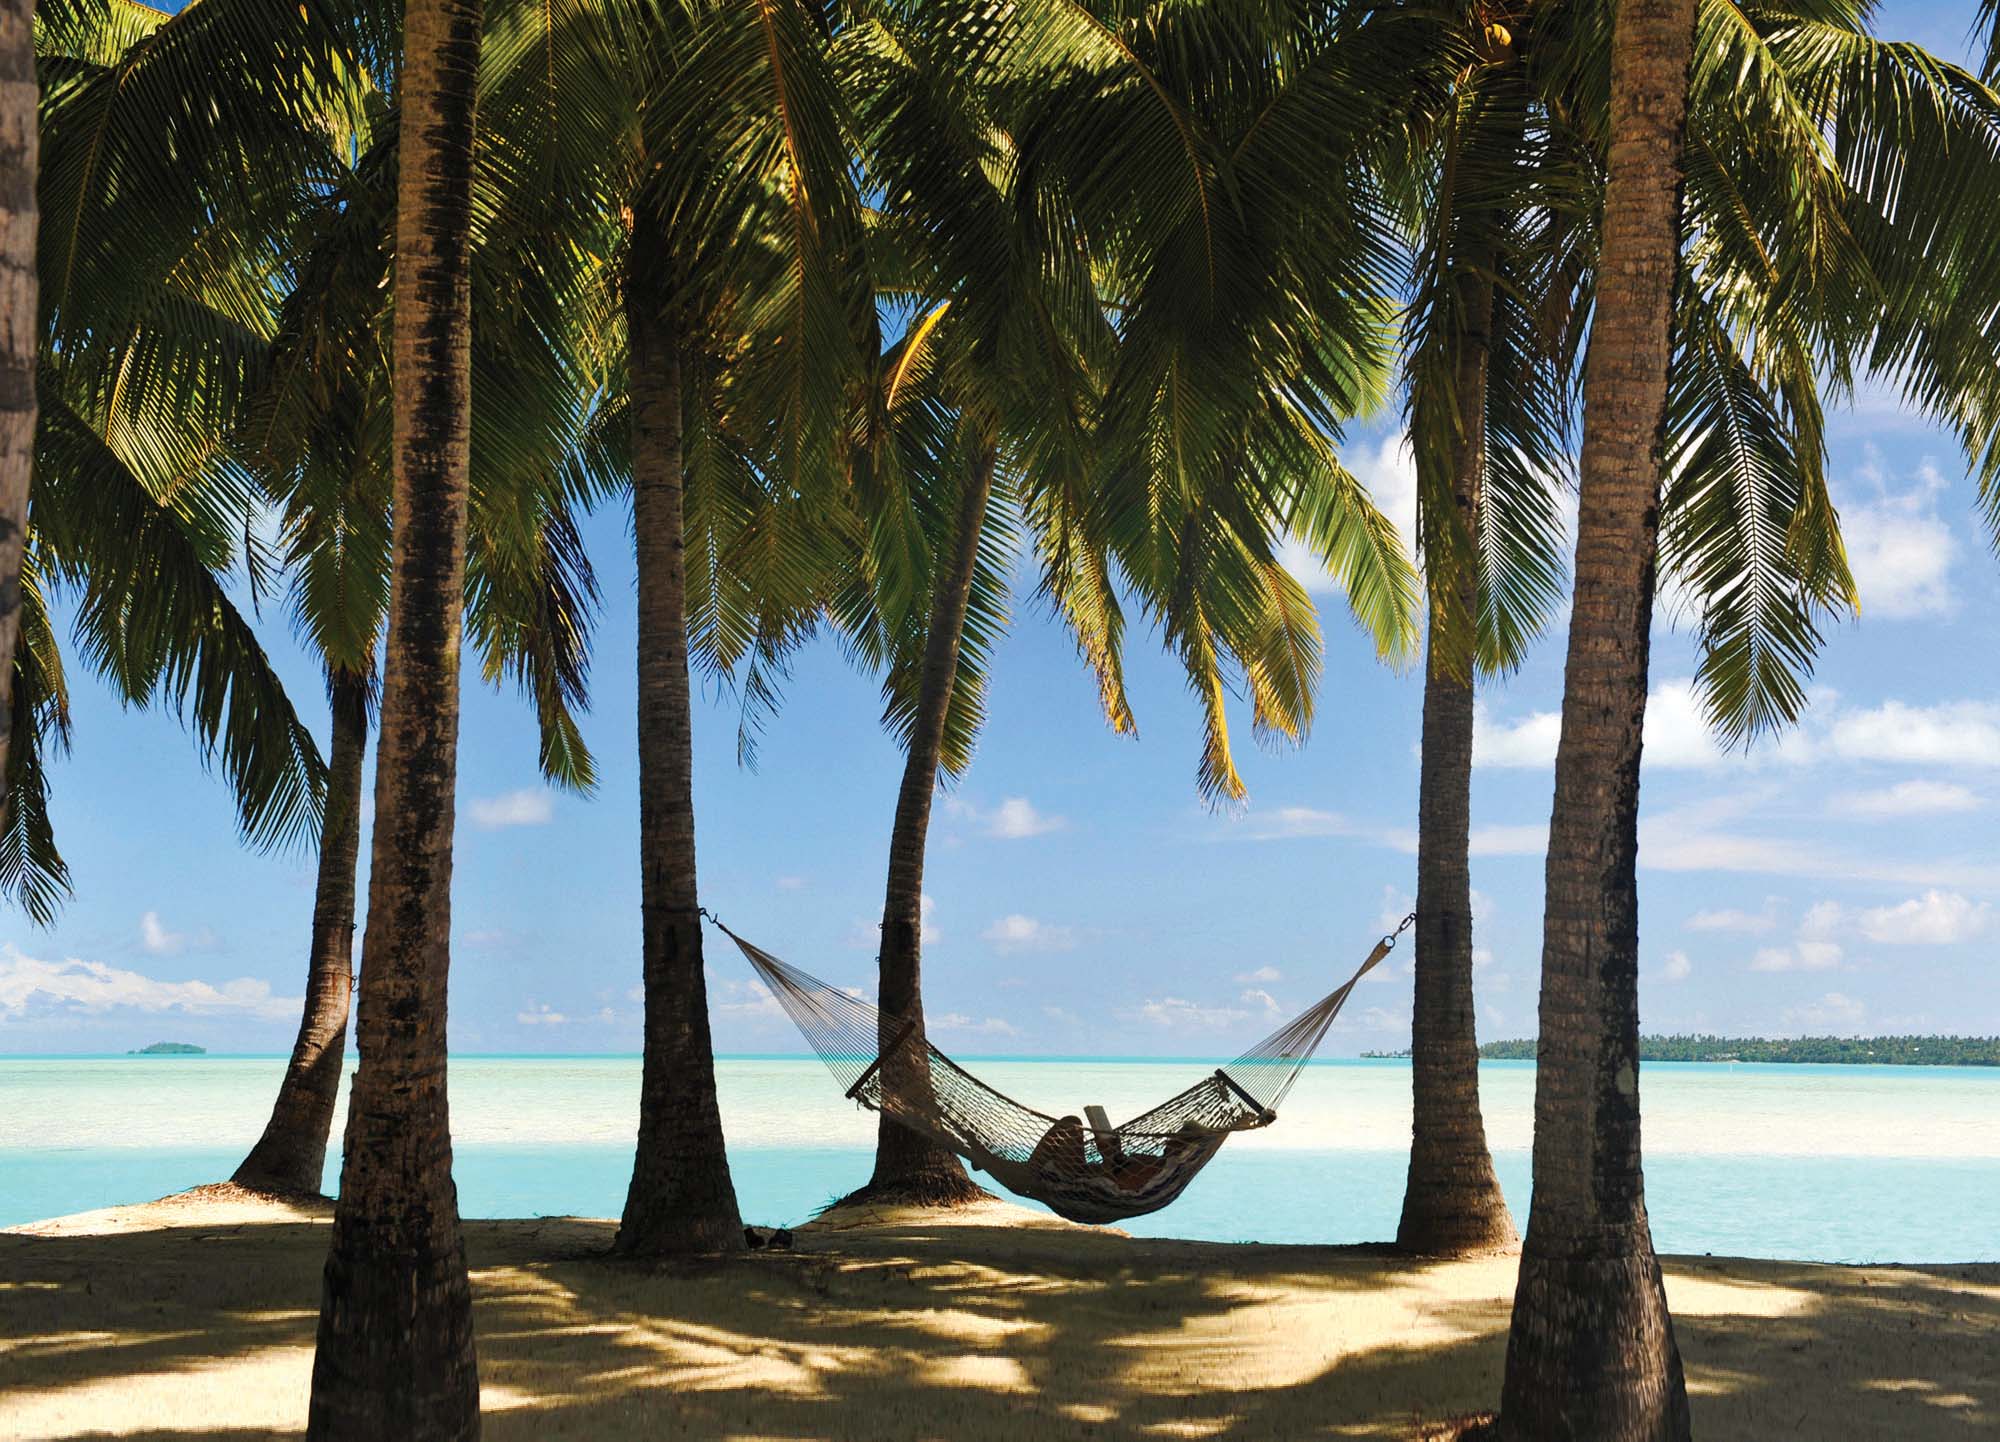 A person relaxing in a hammock by the beach, enjoying the cool shade of the coconut palms